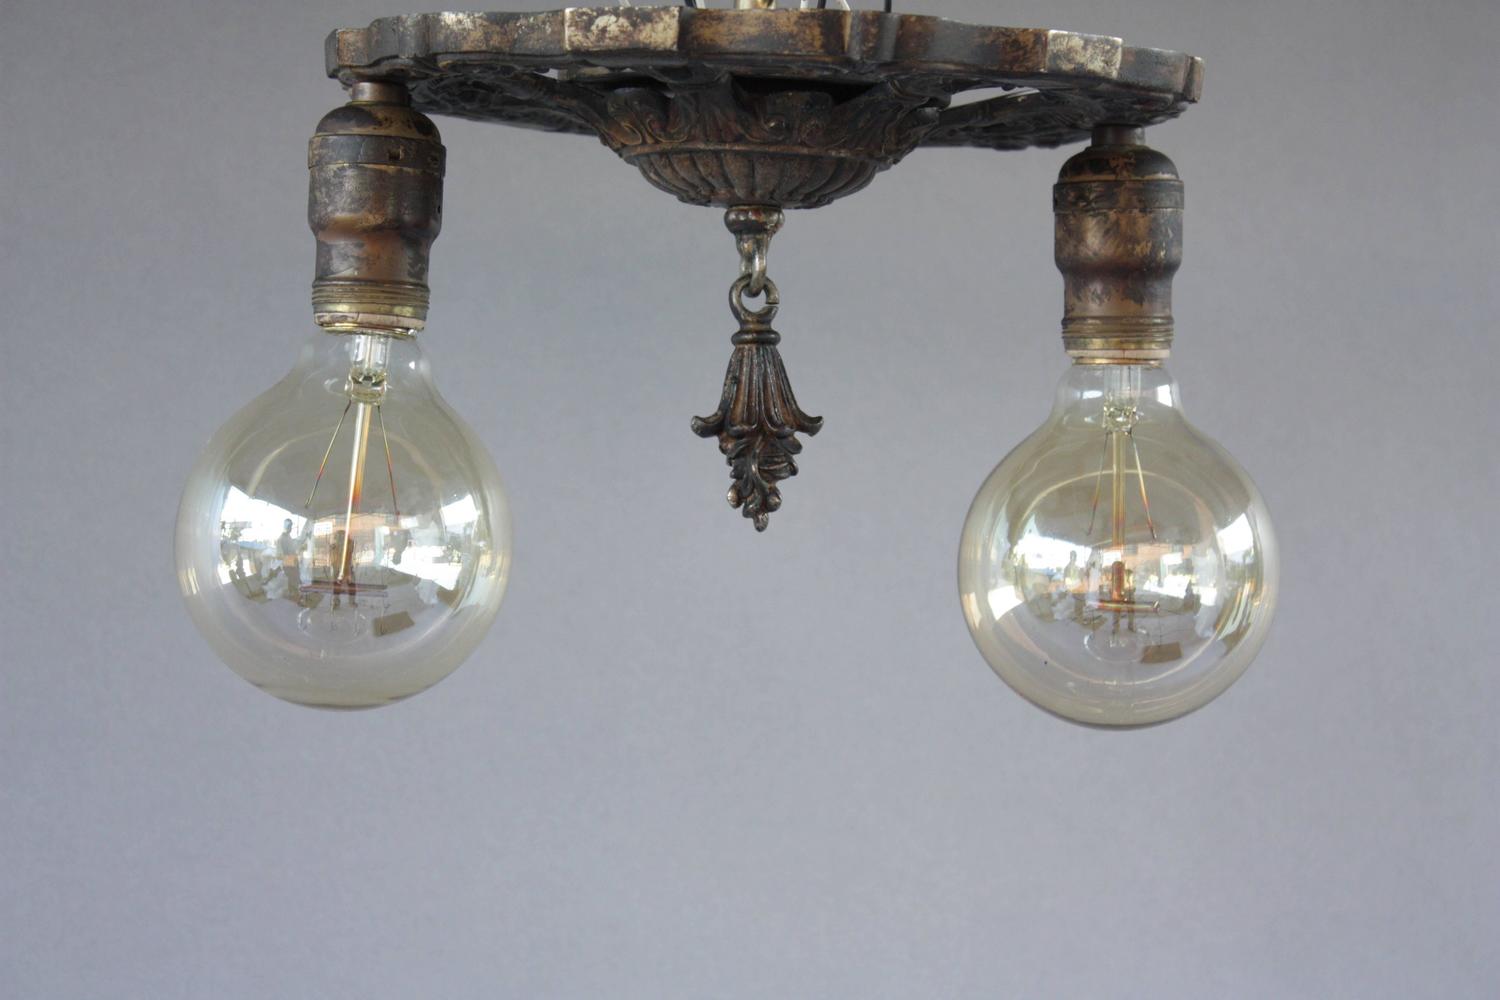 Antique 1920s Two-Light Ceiling Mount Light Fixture at 1stdibs